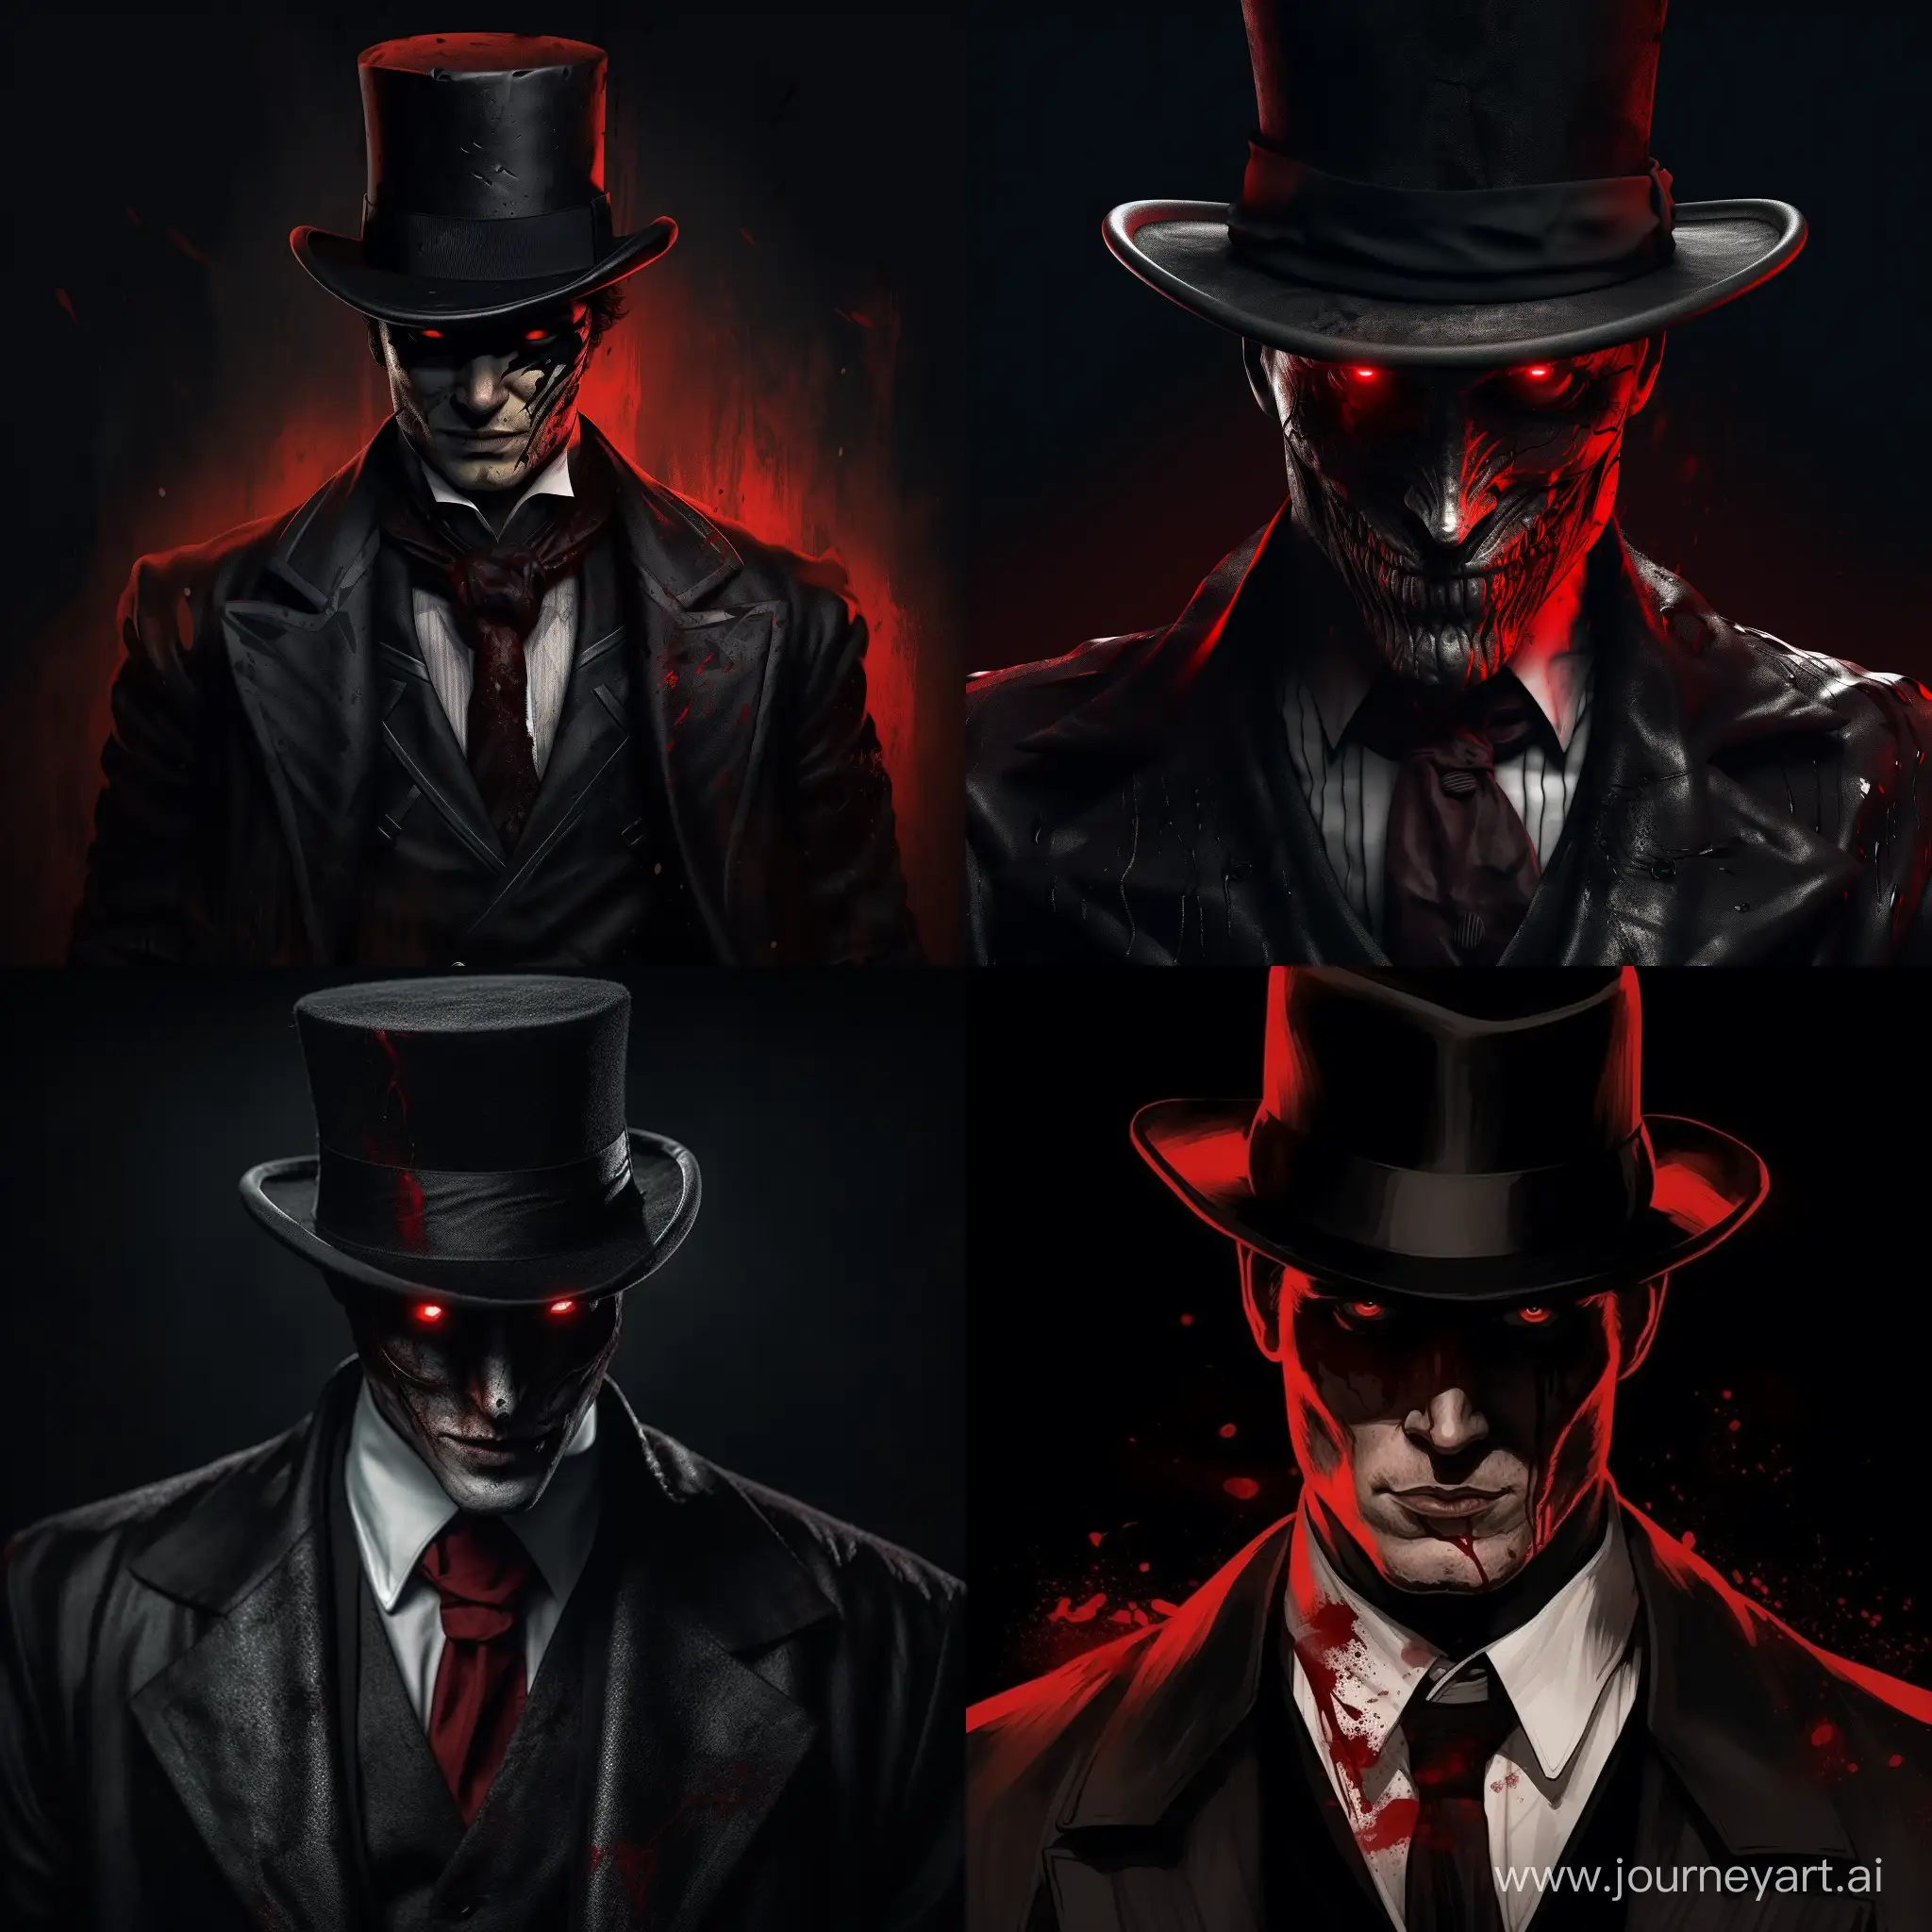 Jack the Ripper as a gangster with red eyes